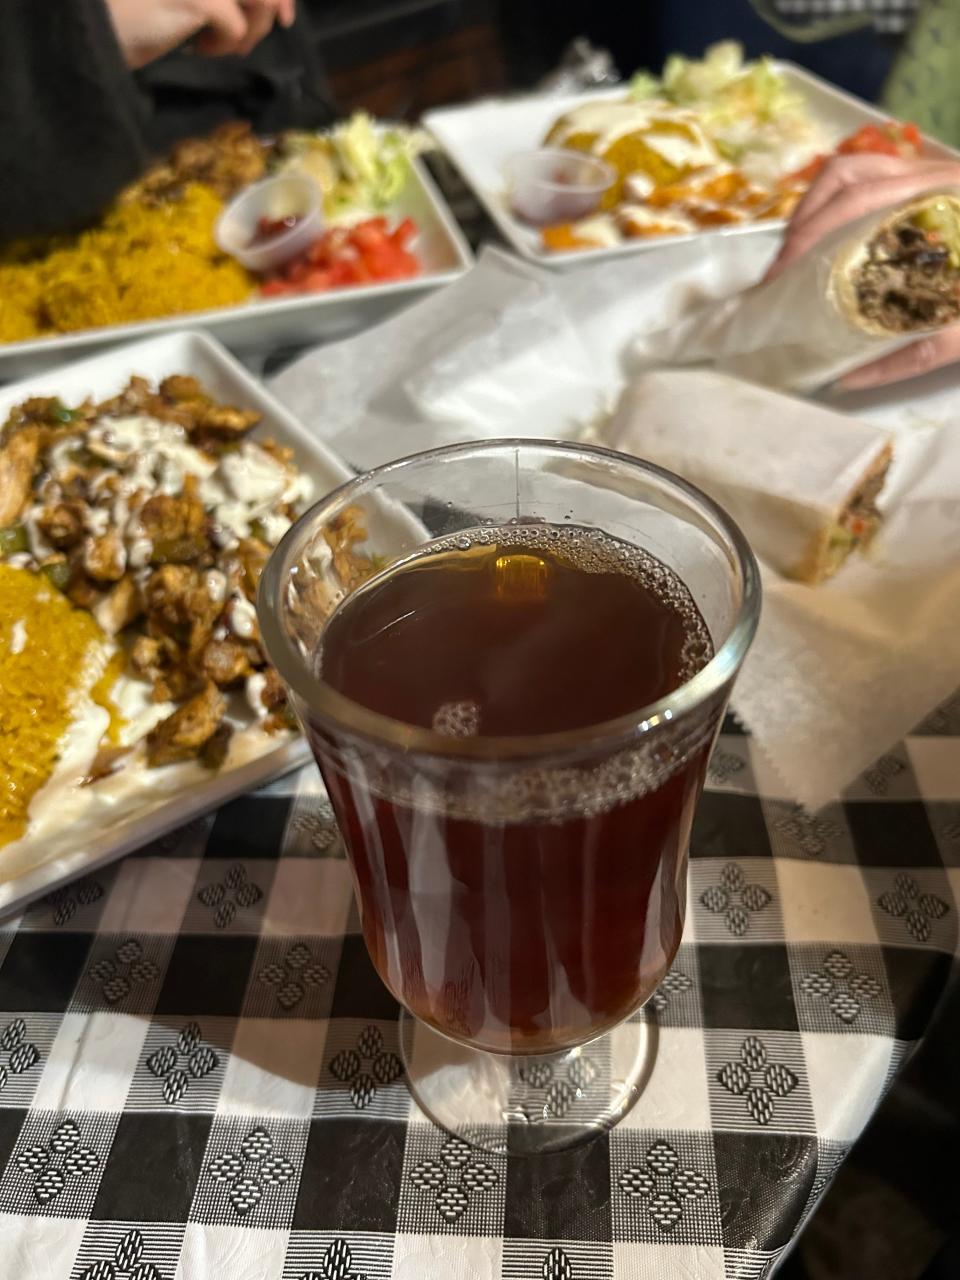 Hot Saudi mint tea at Mid-East Cafe and Restaurant in Akron.